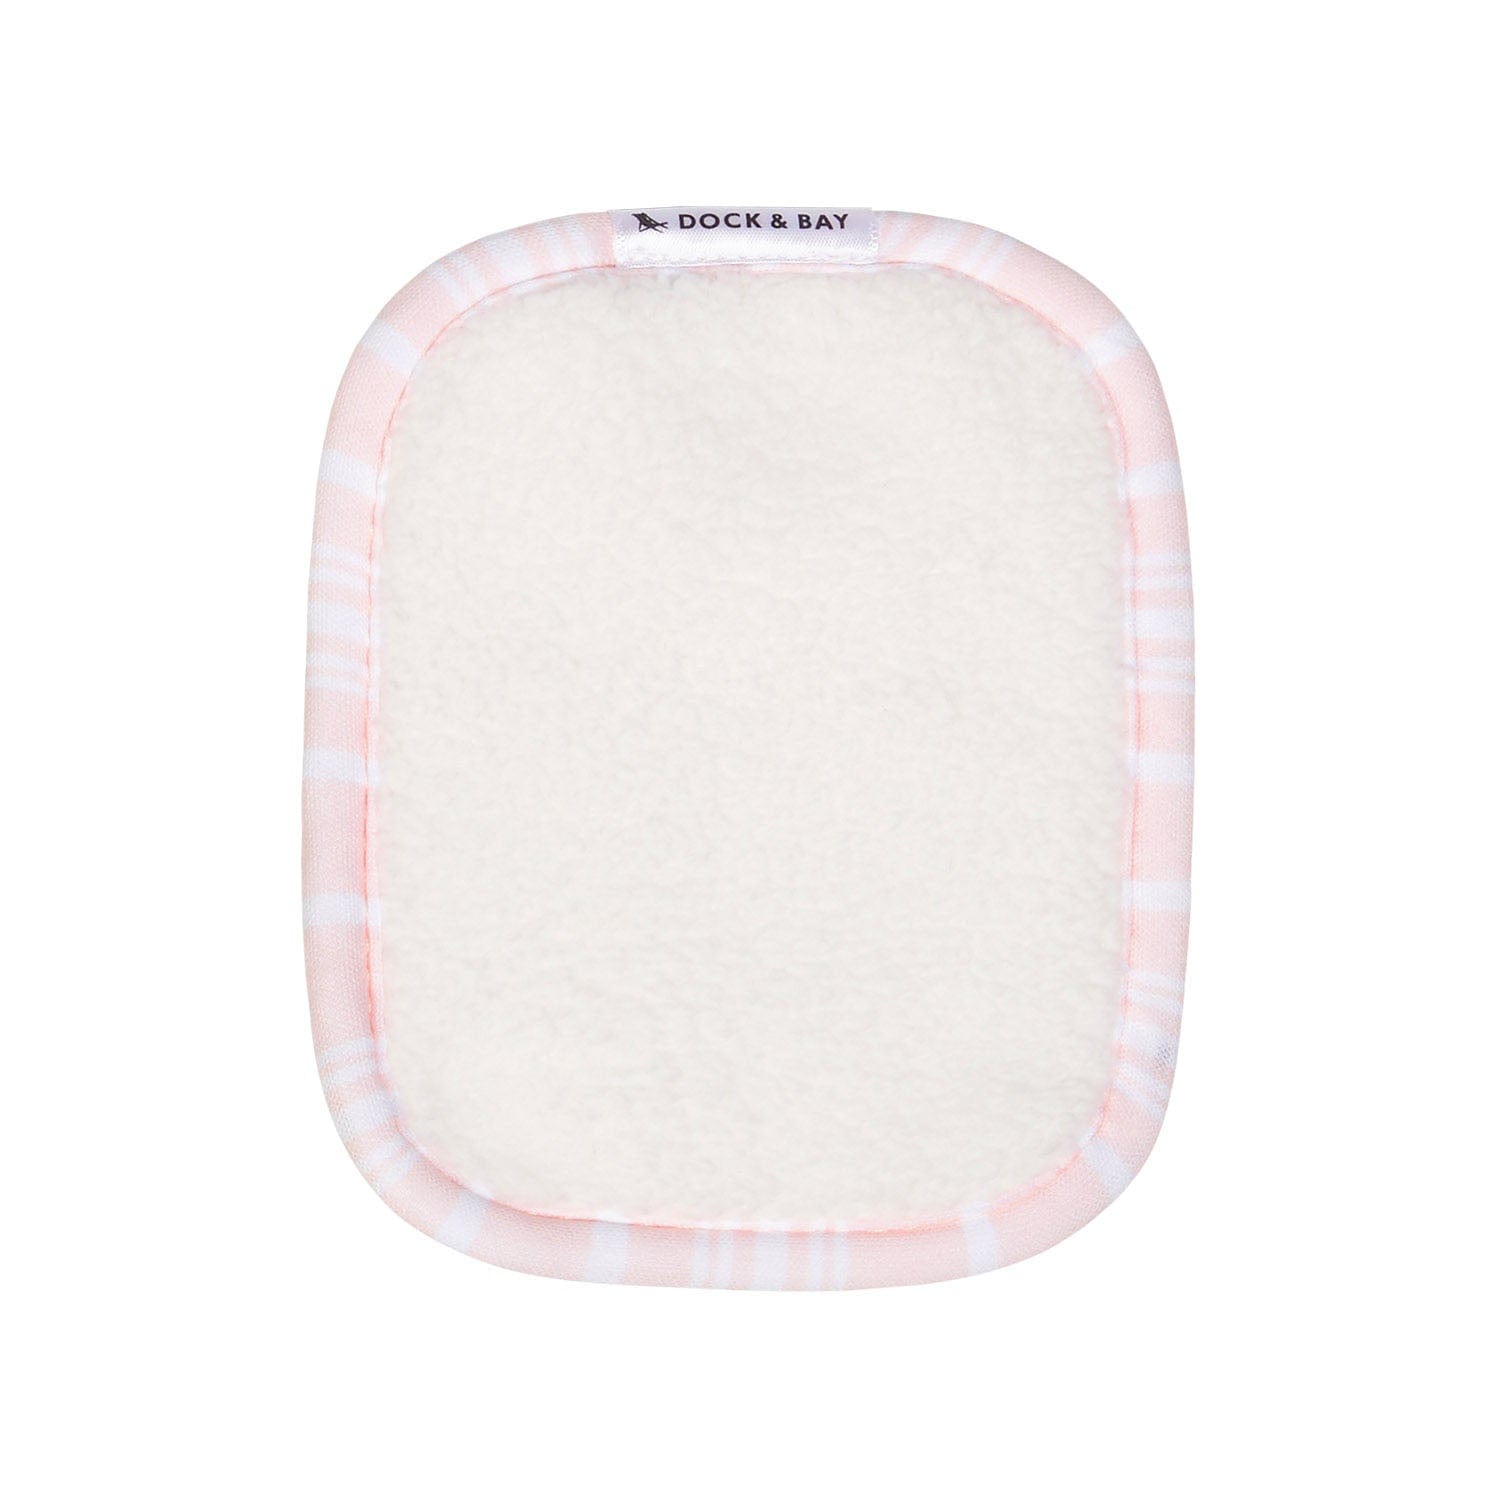 Dock & Bay Makeup Removers Peppermint Pink